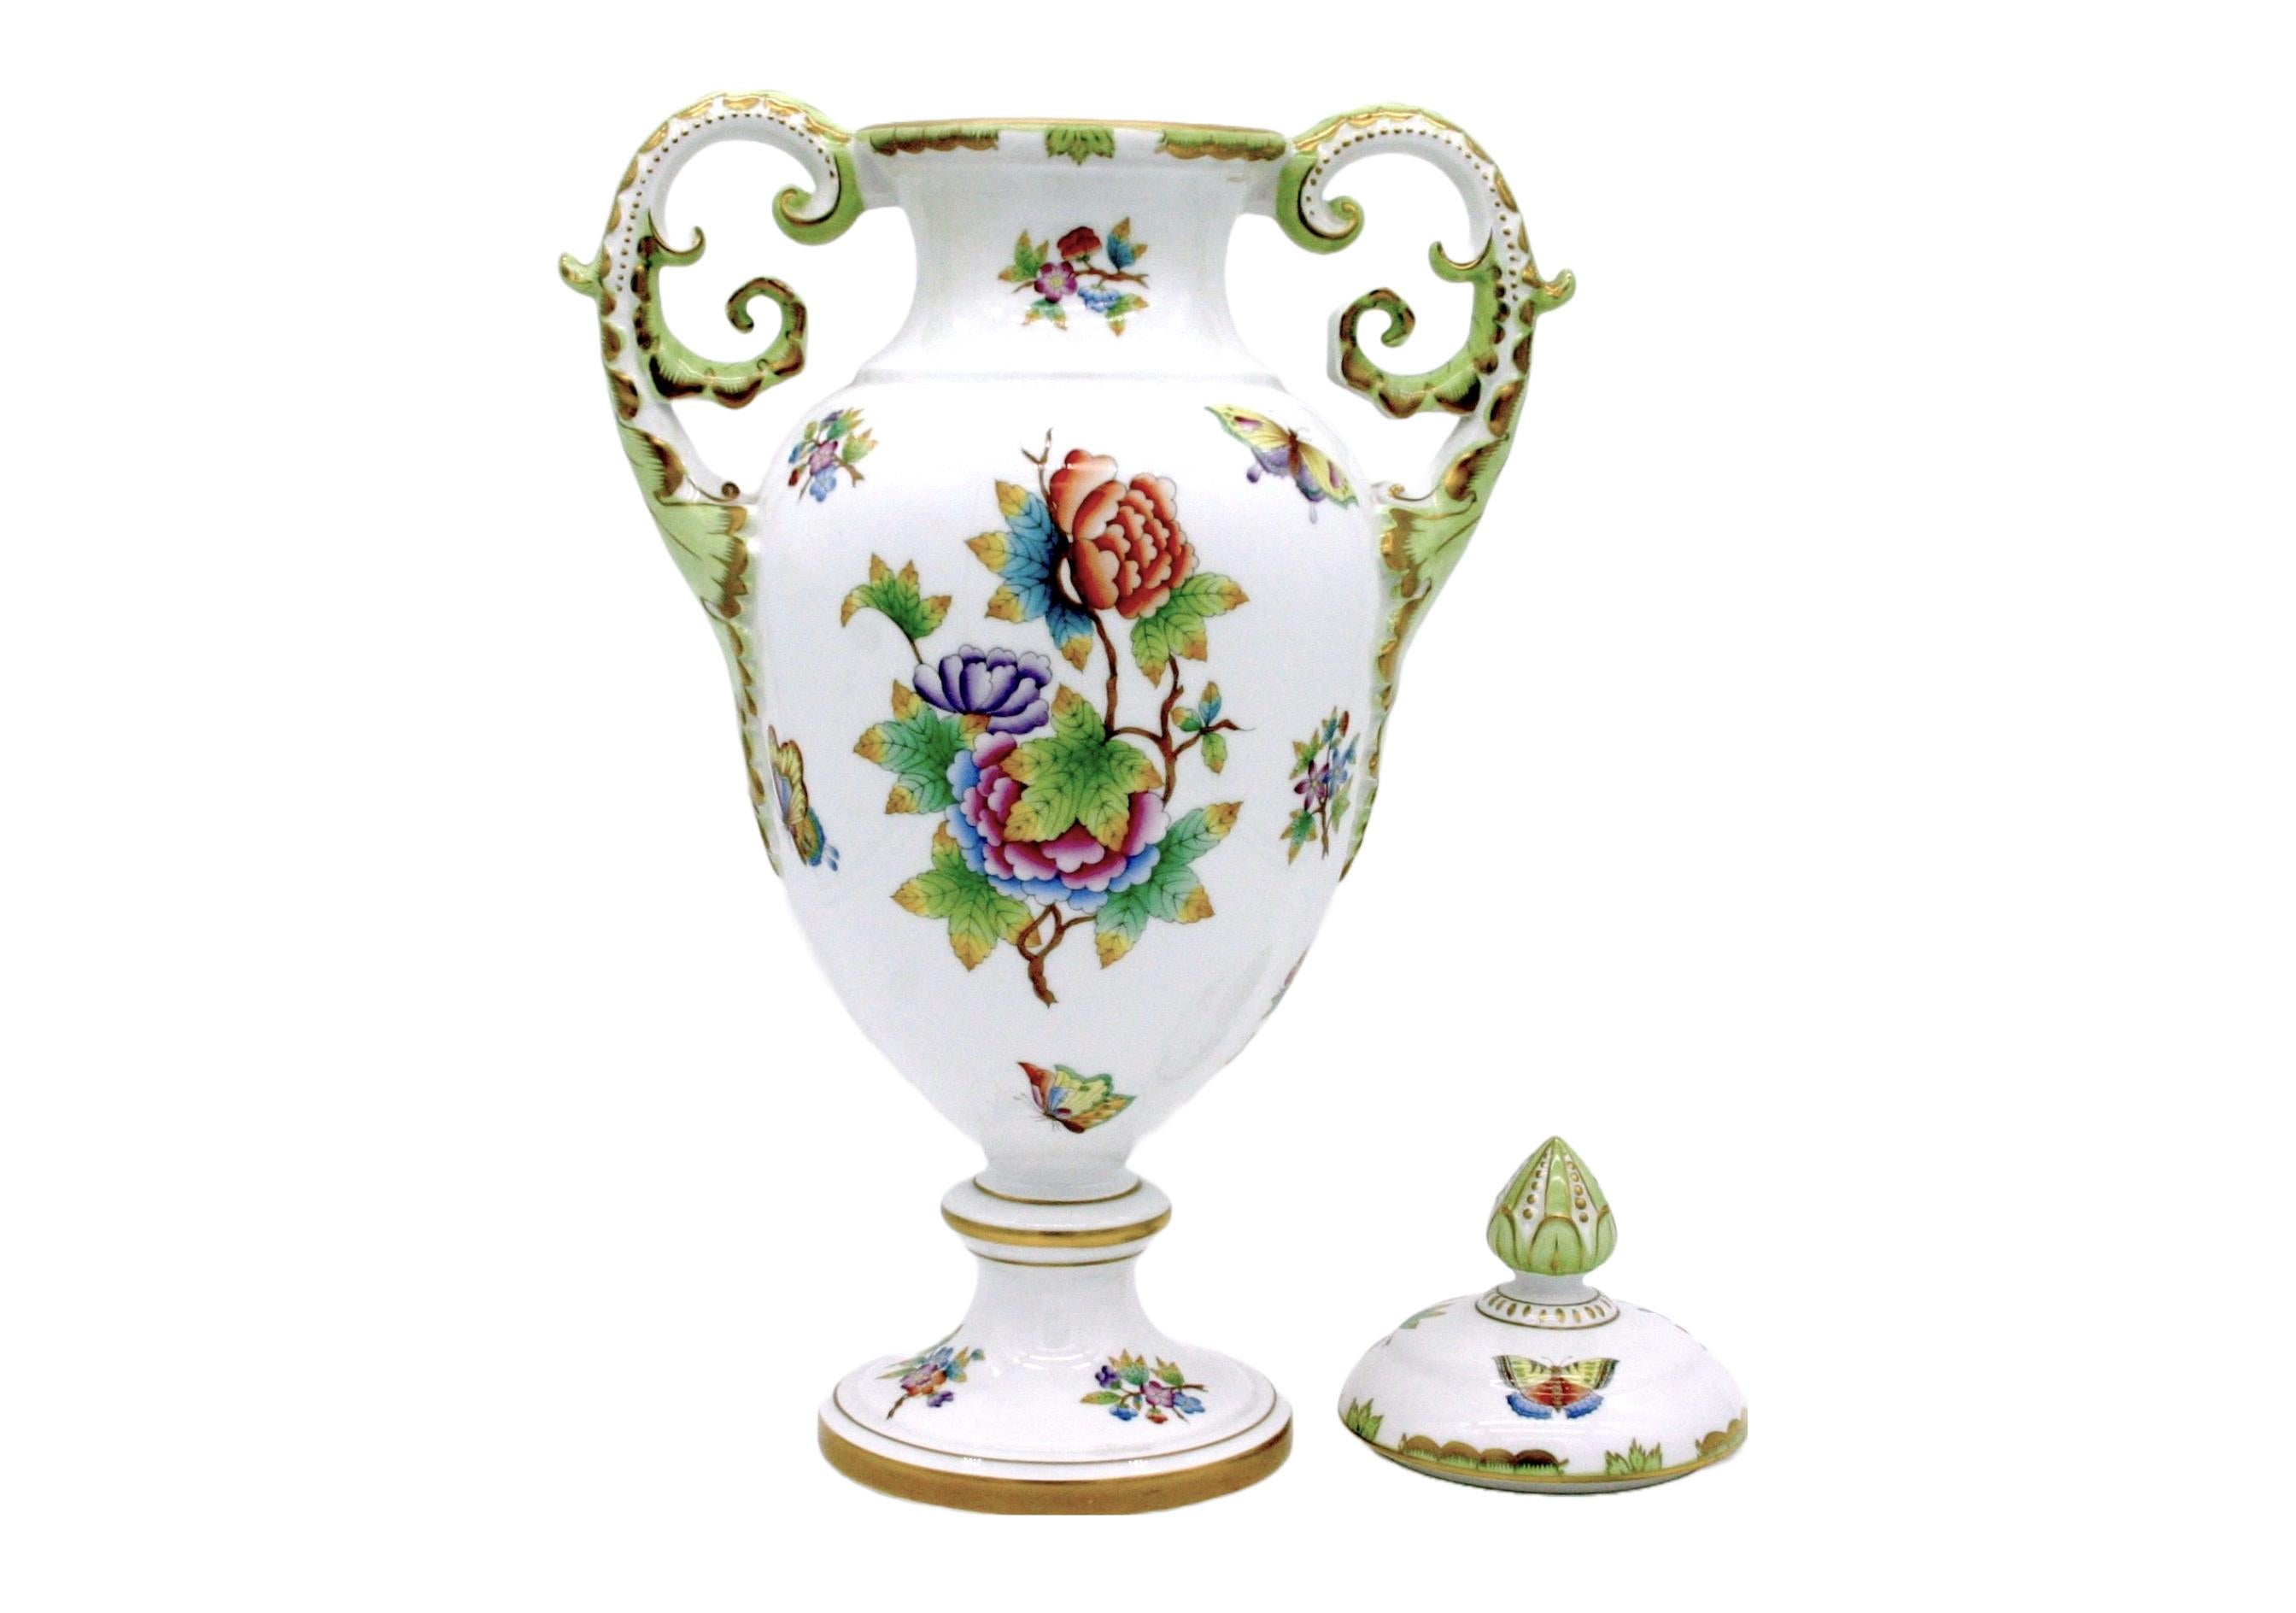 Classic Herend Queen Victoria pattern is transformed from special dinnerware into a beautifully decorated urn/vase . Stunning art in its own right , the handles of the urn/ vase are ornately handcrafted dragons with feathered wings accented with